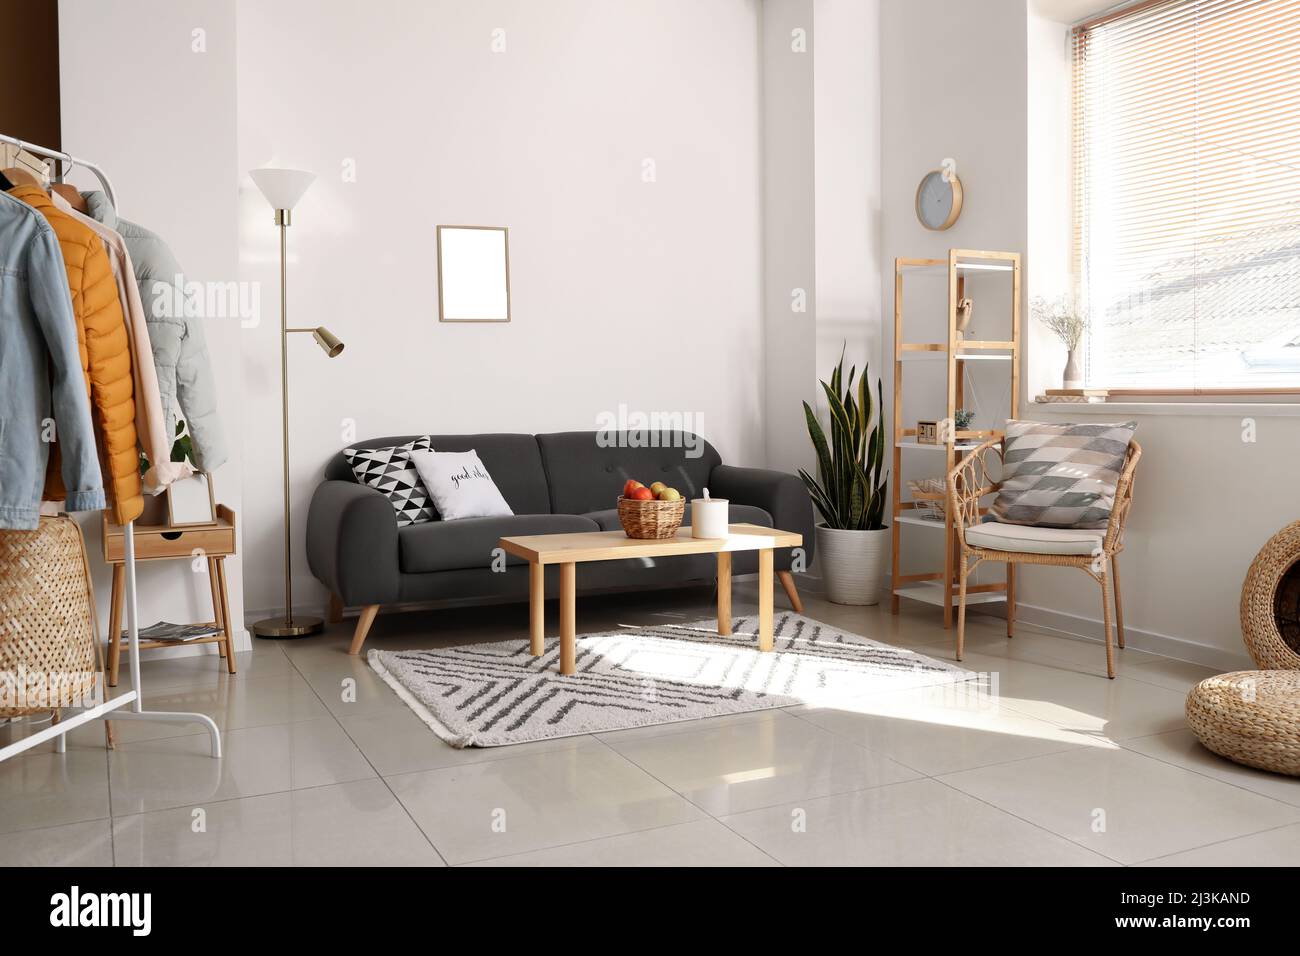 Interior of light room with black sofa and warm jackets Stock Photo